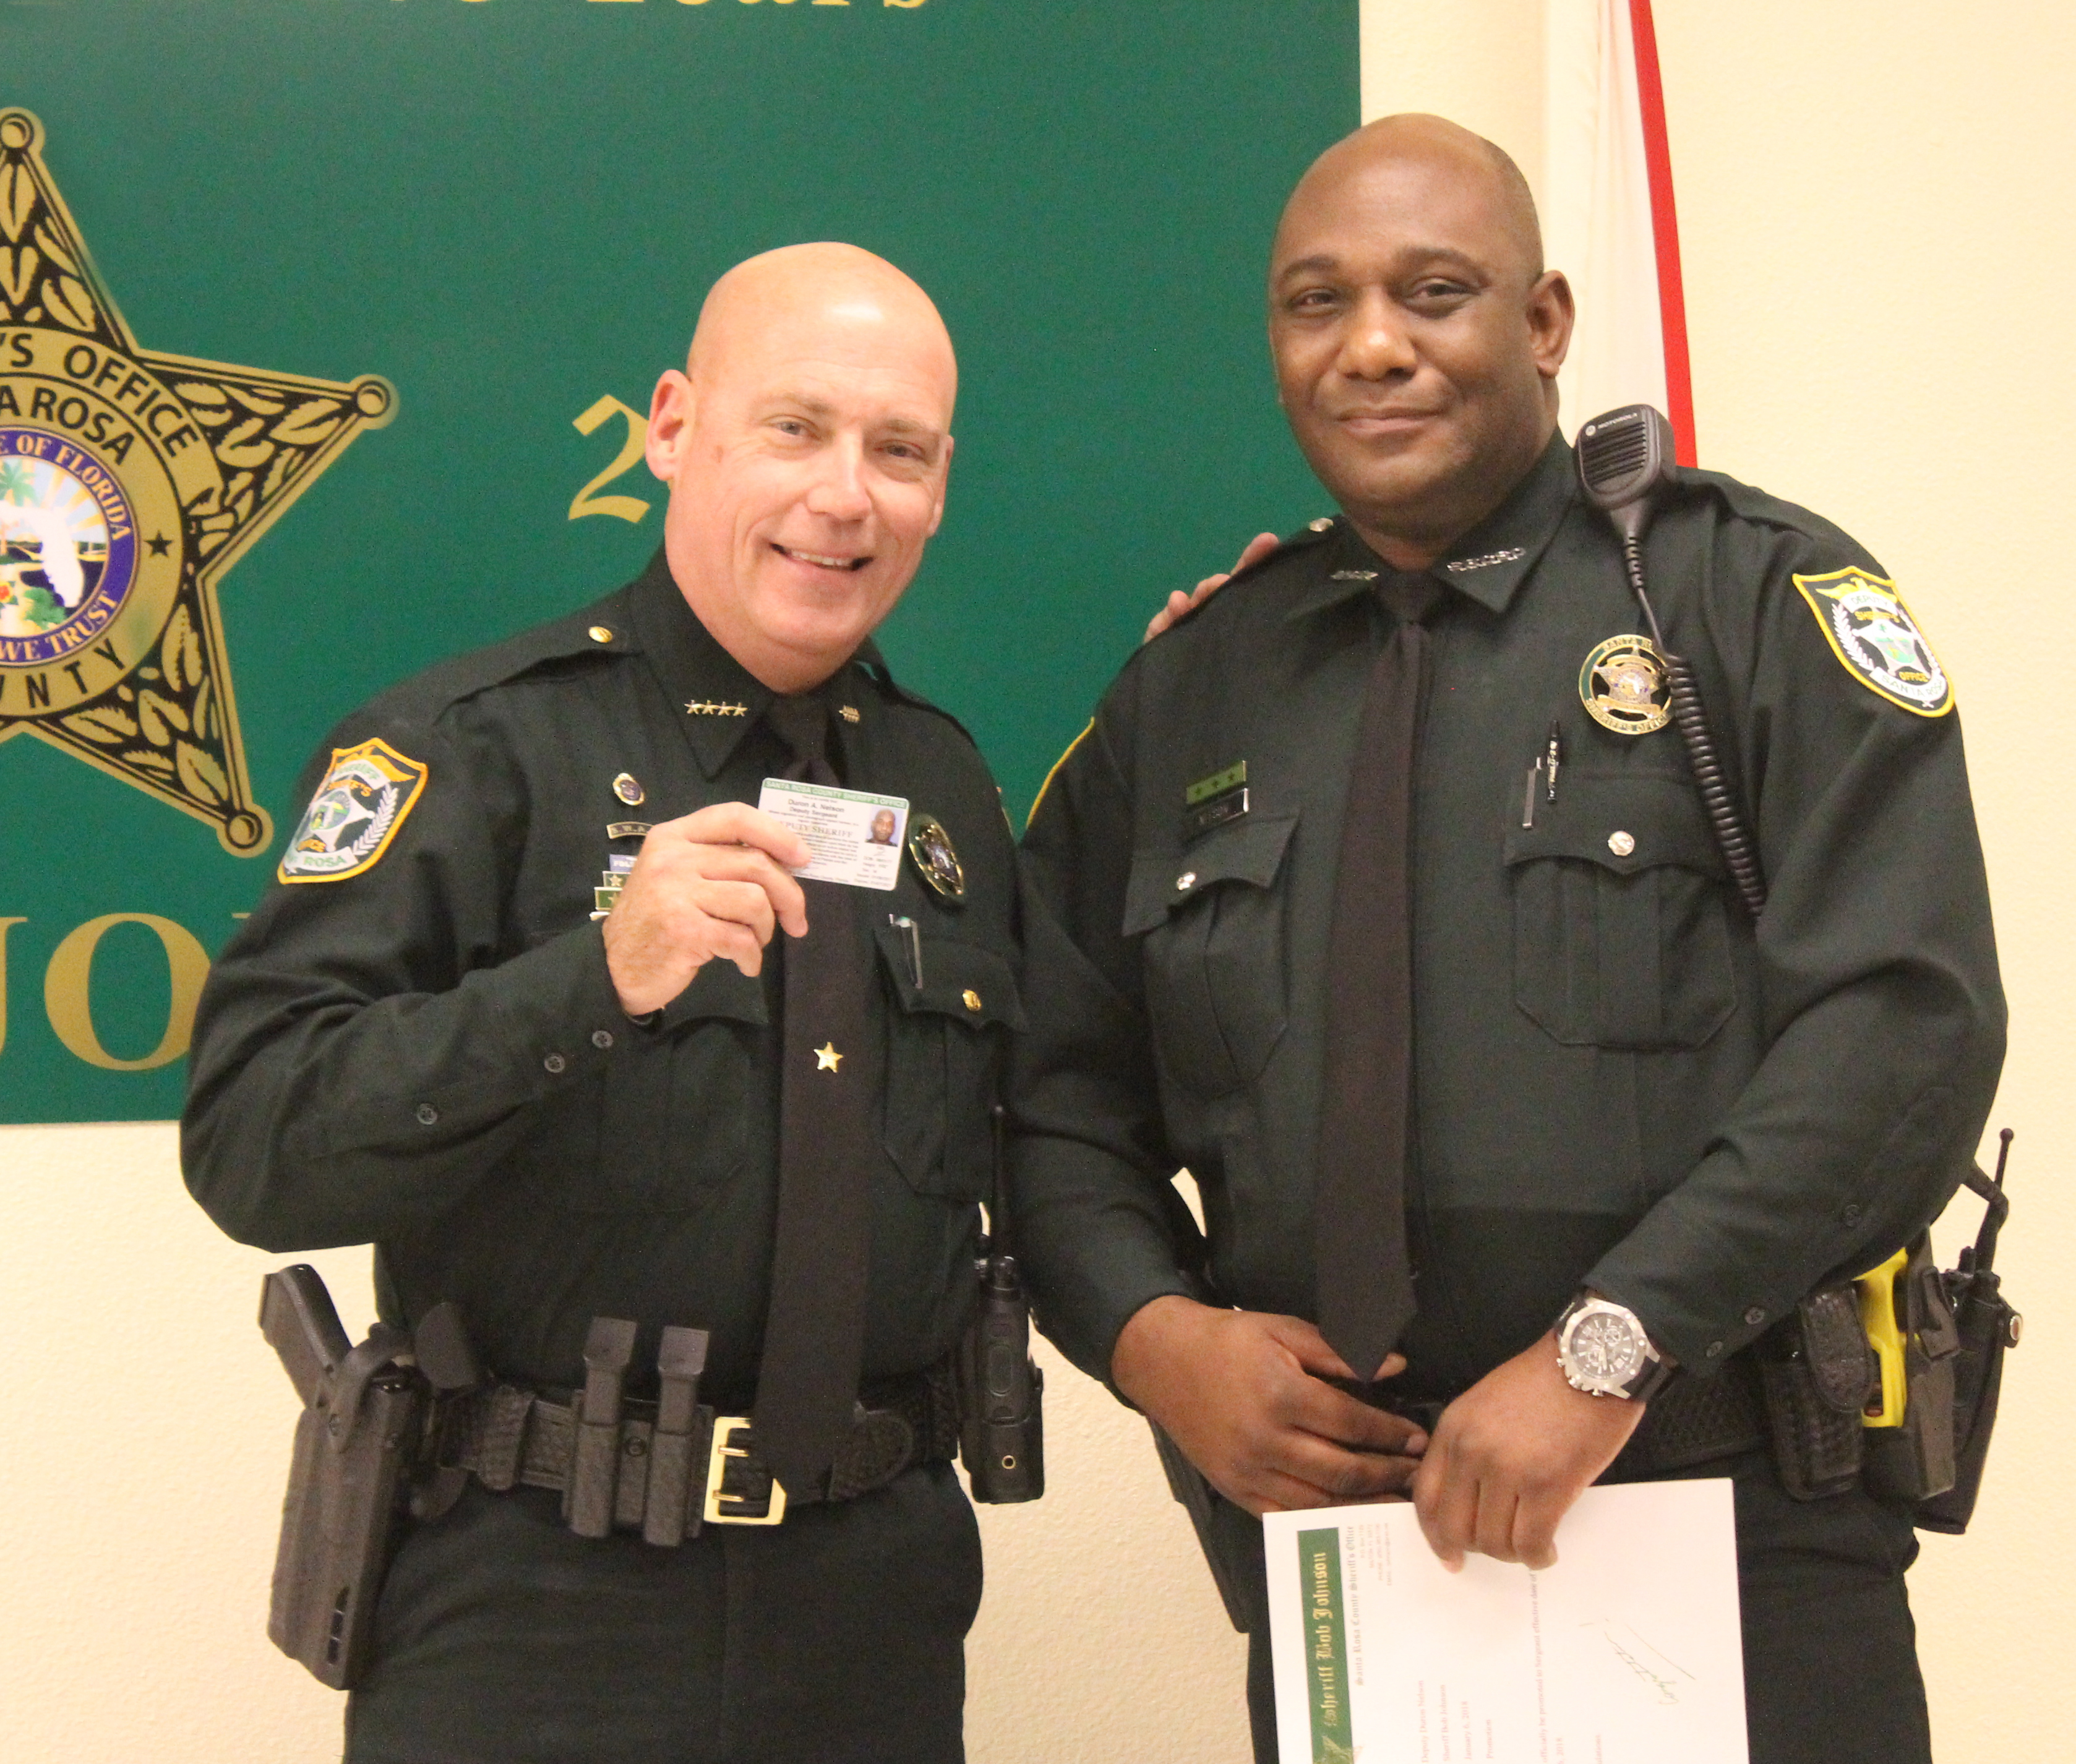 Two police officers, one holding an id card, smiling and standing side by side in a room with a green banner in the background.